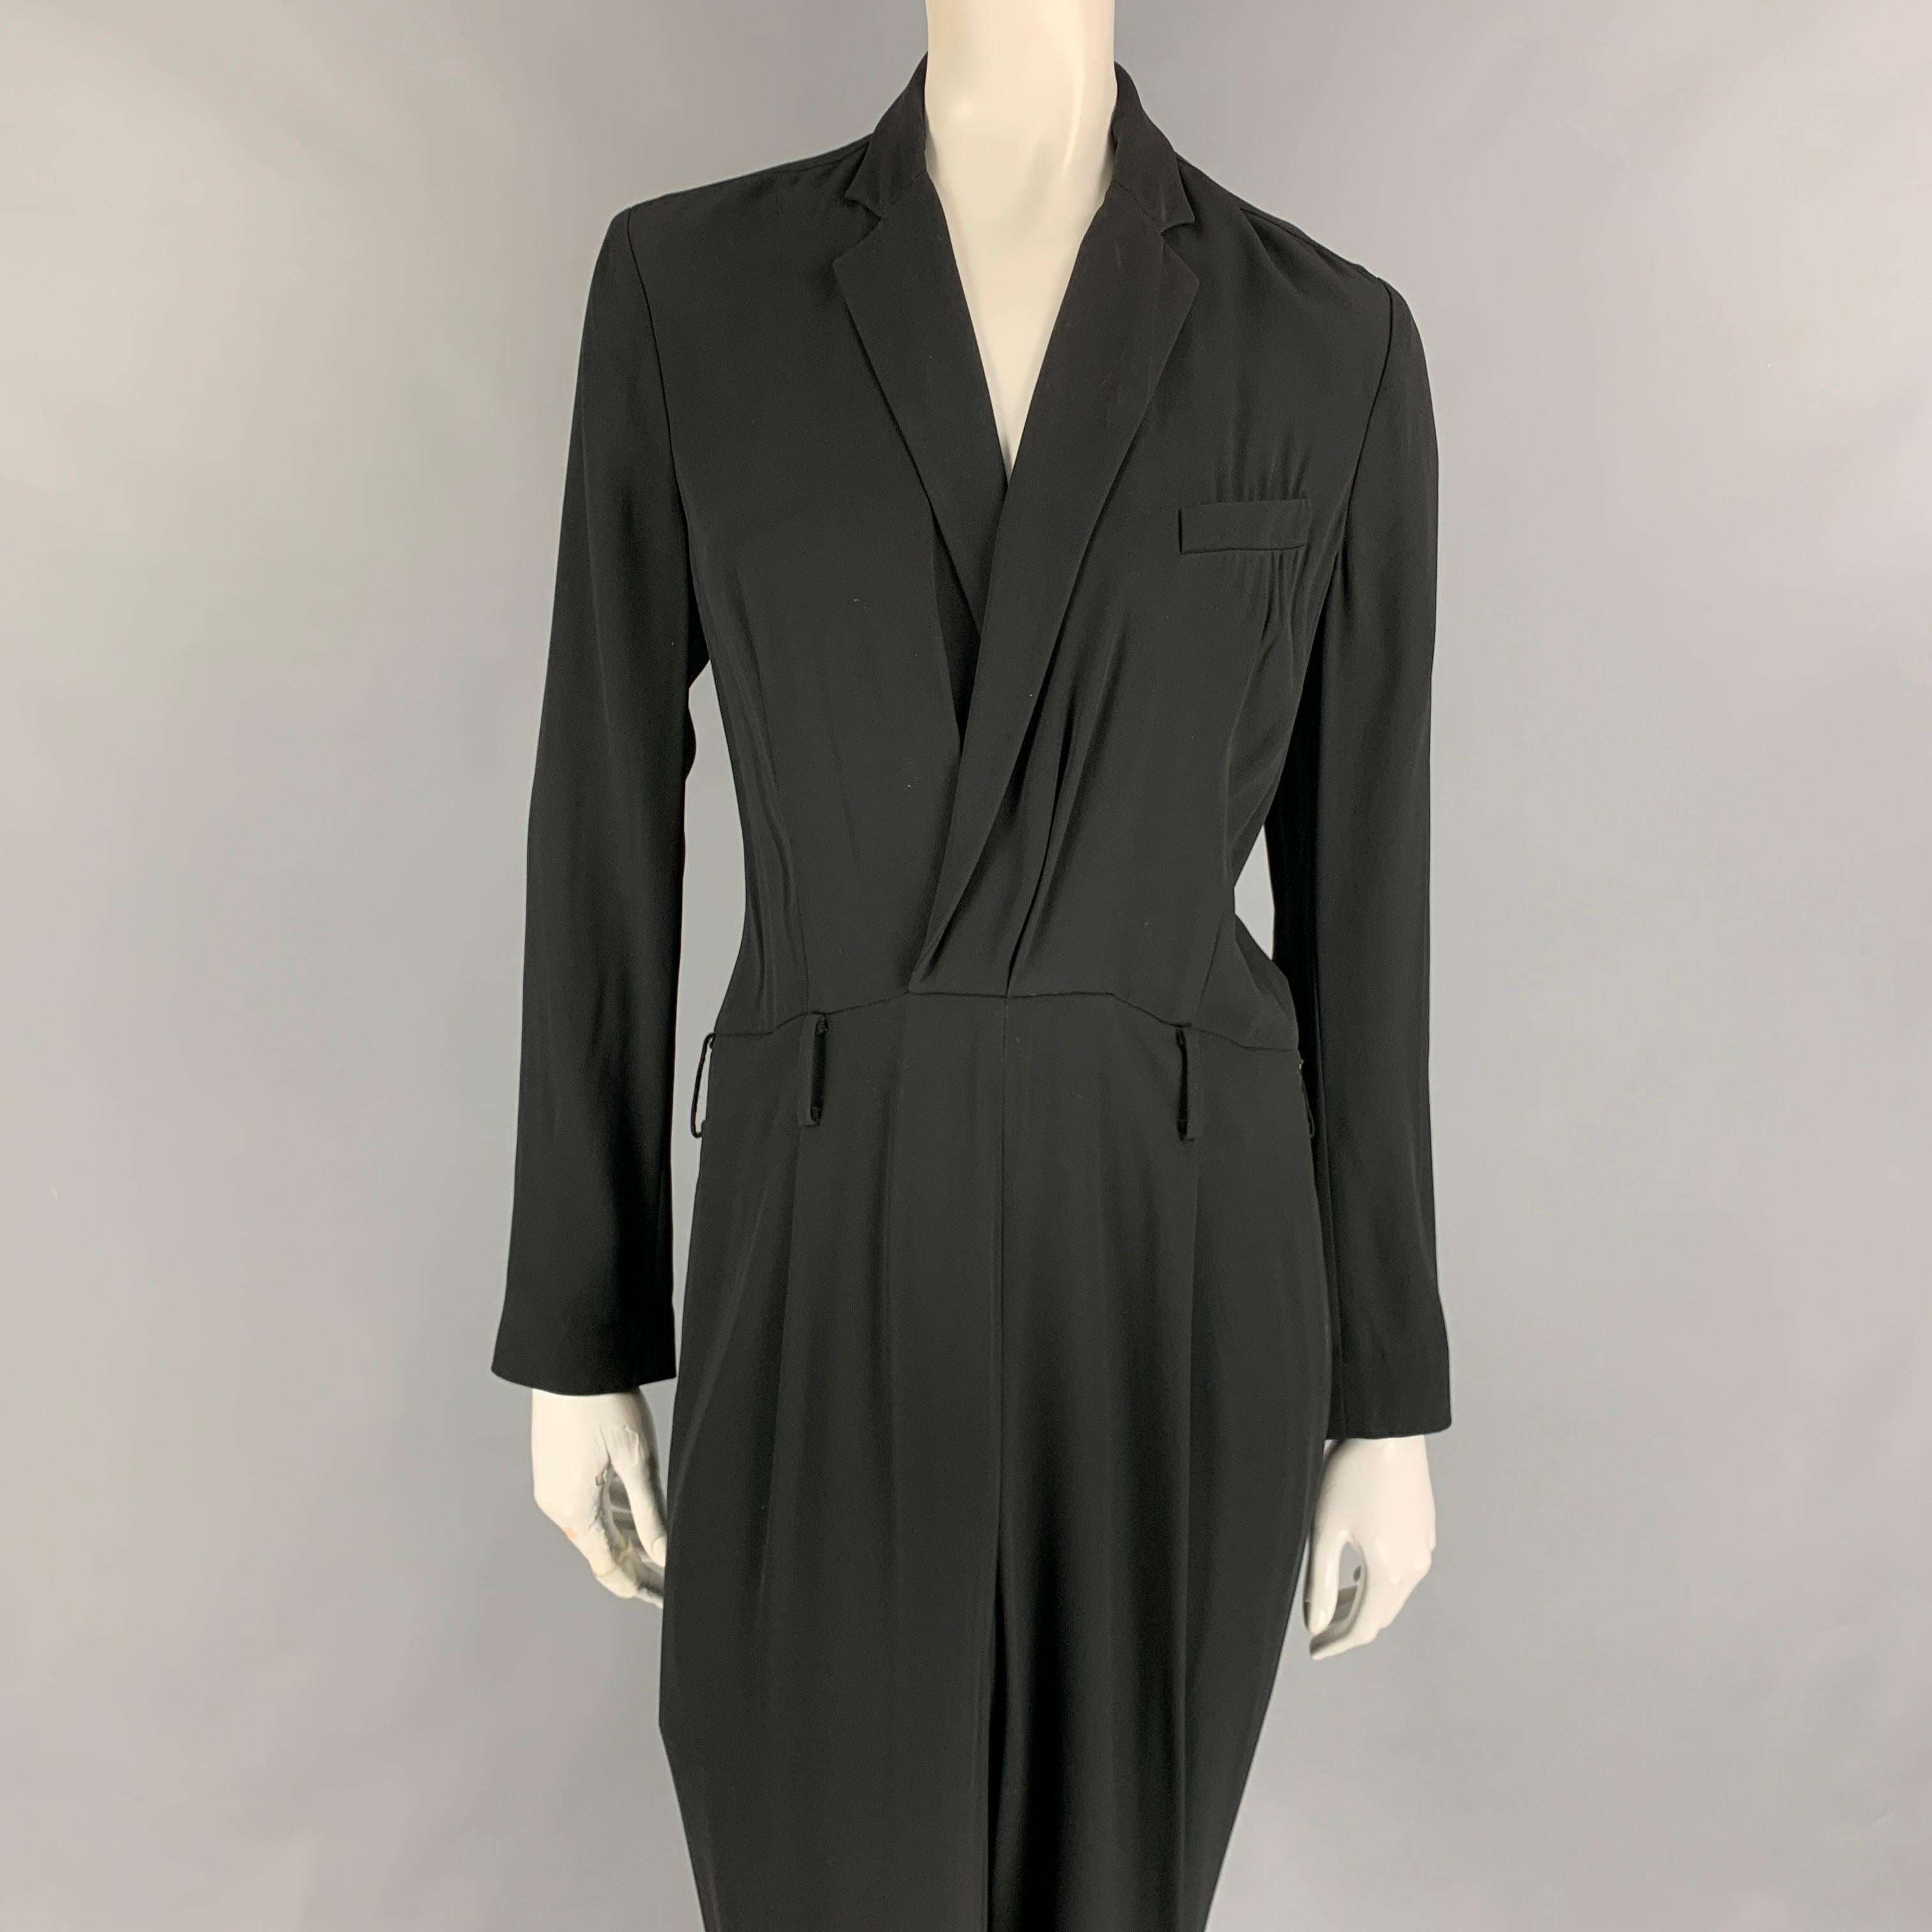 RALPH LAUREN Collection jumpsuit comes in a black viscose / acetate featuring a notch lapel, loose fit, long sleeves, and a side zipper closure. Made in USA. 

Very Good Pre-Owned Condition.
Marked: 8

Measurements:

Shoulder: 16 in.
Bust: 35